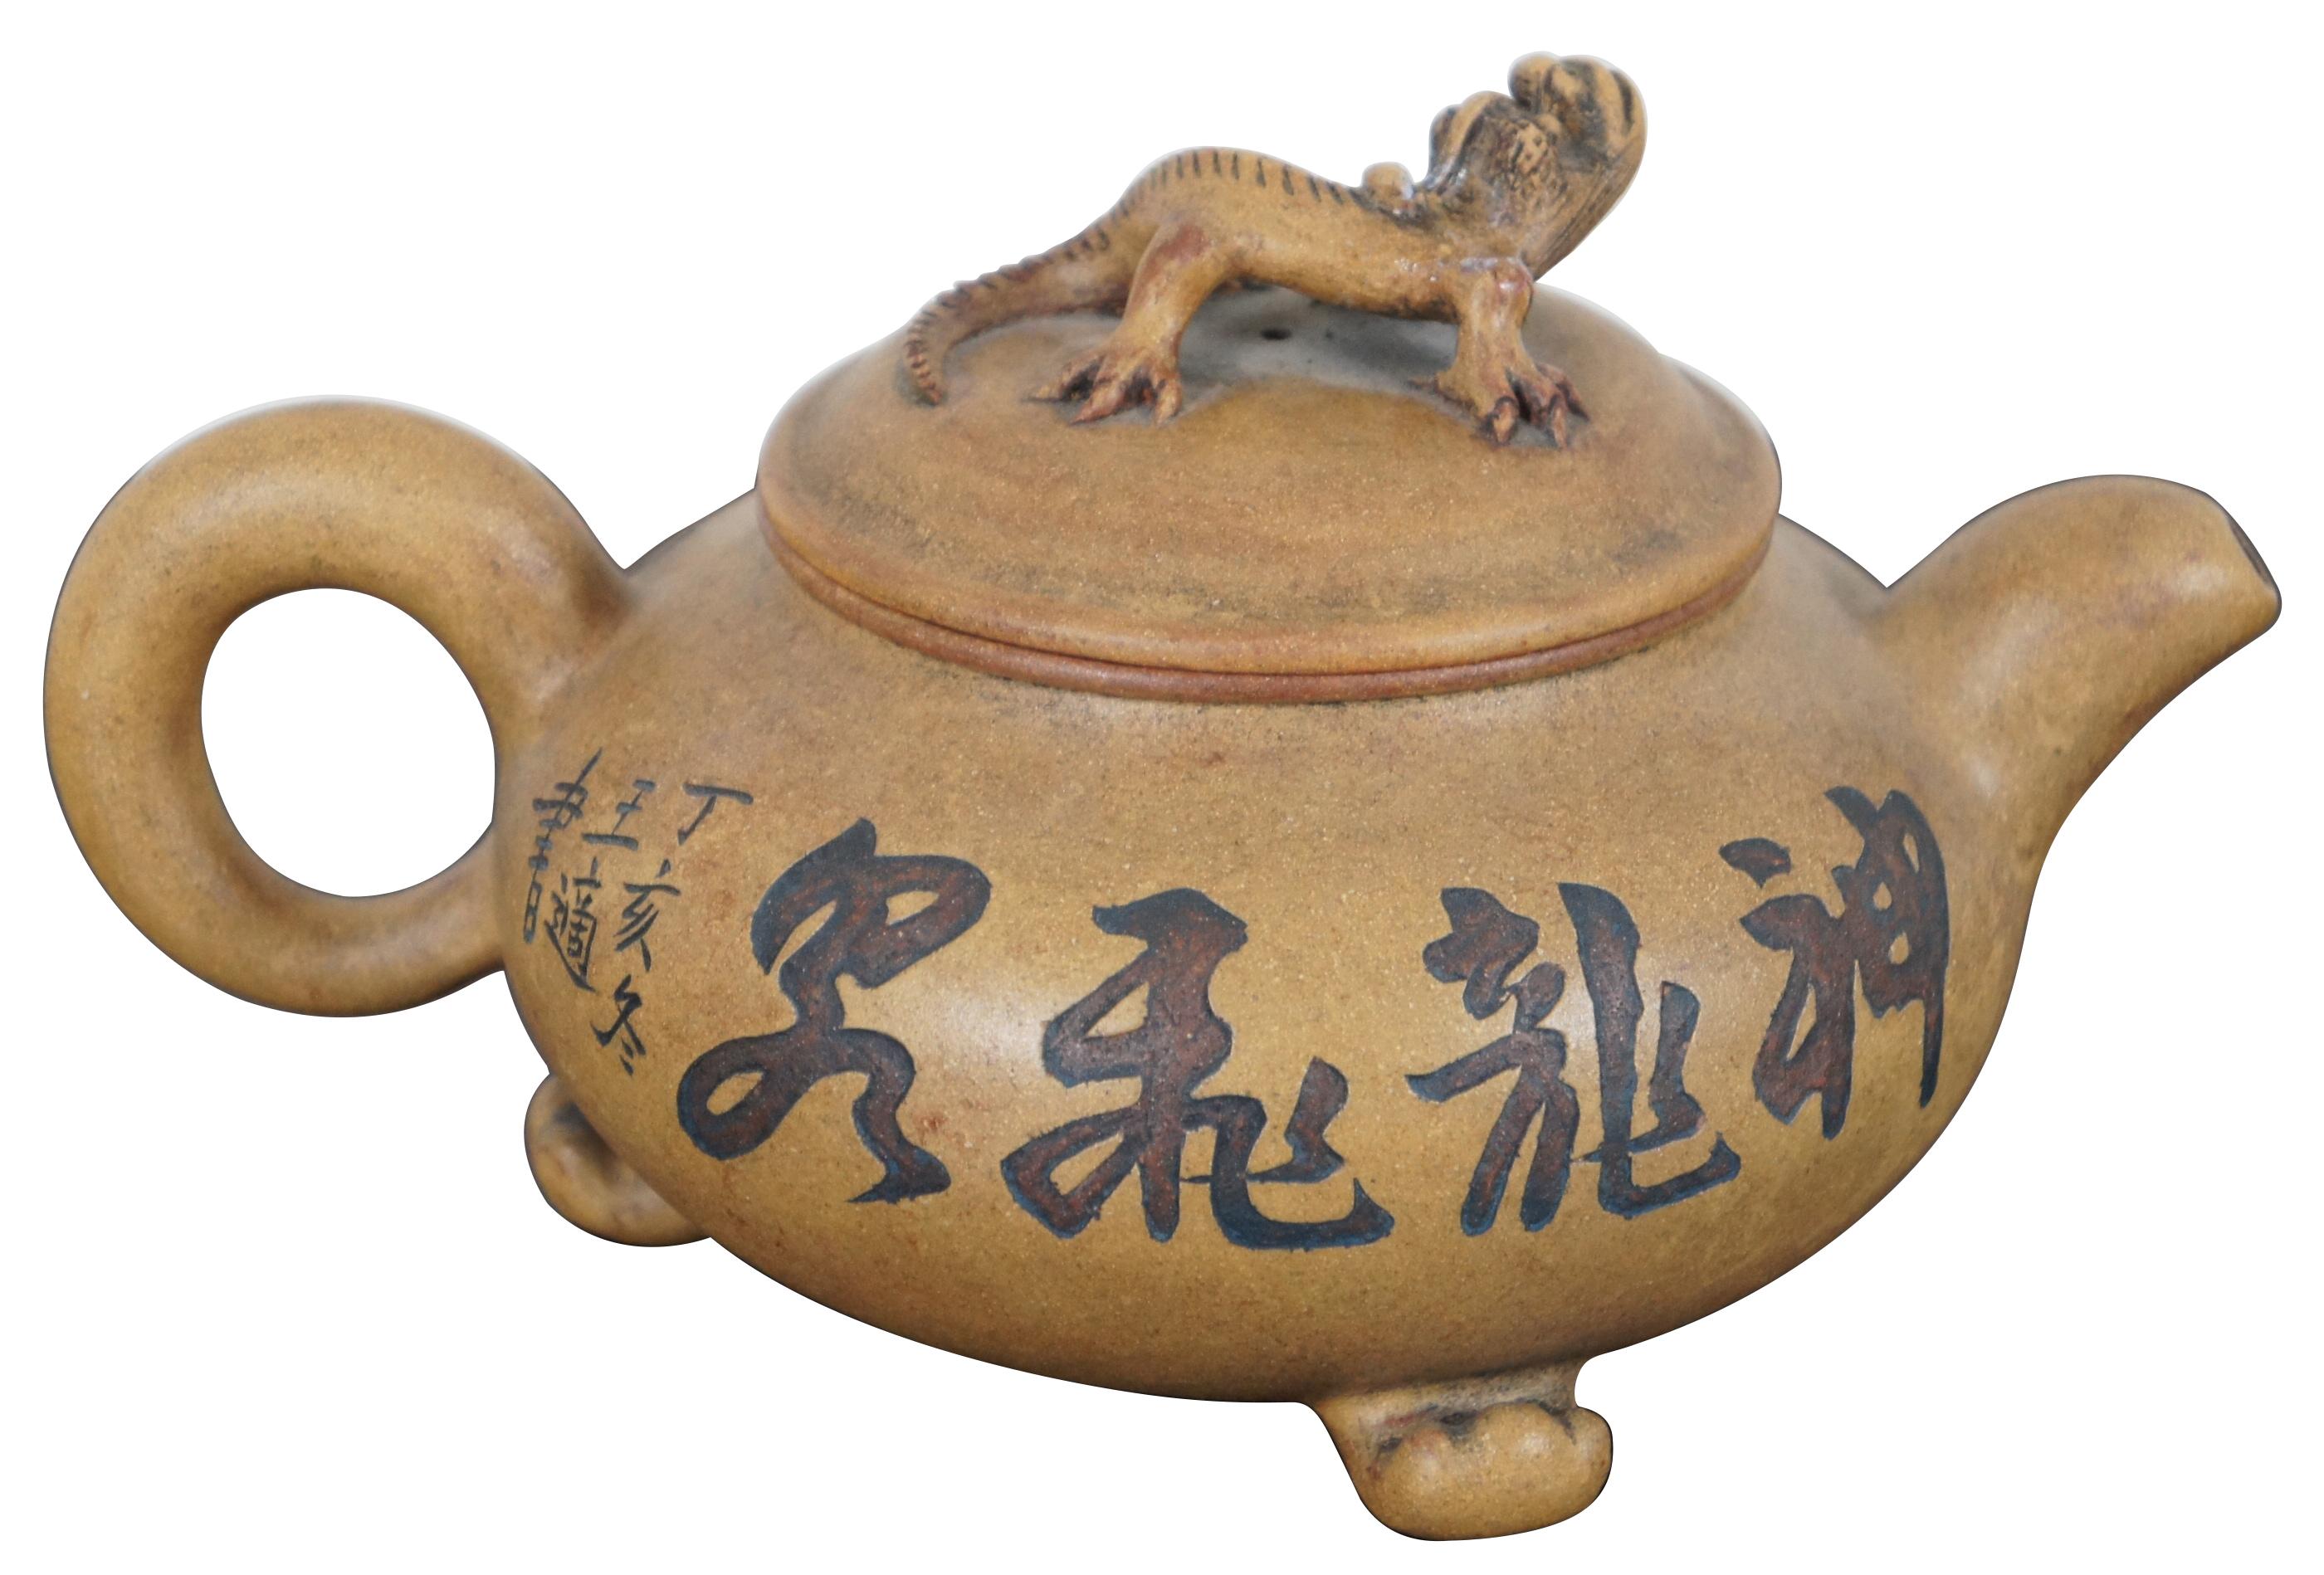 Vintage Chinese Yixing Zisha ceramic teapot with three feet, carved landscape and calligraphy on the sides and a lizard handle on the lid.
    